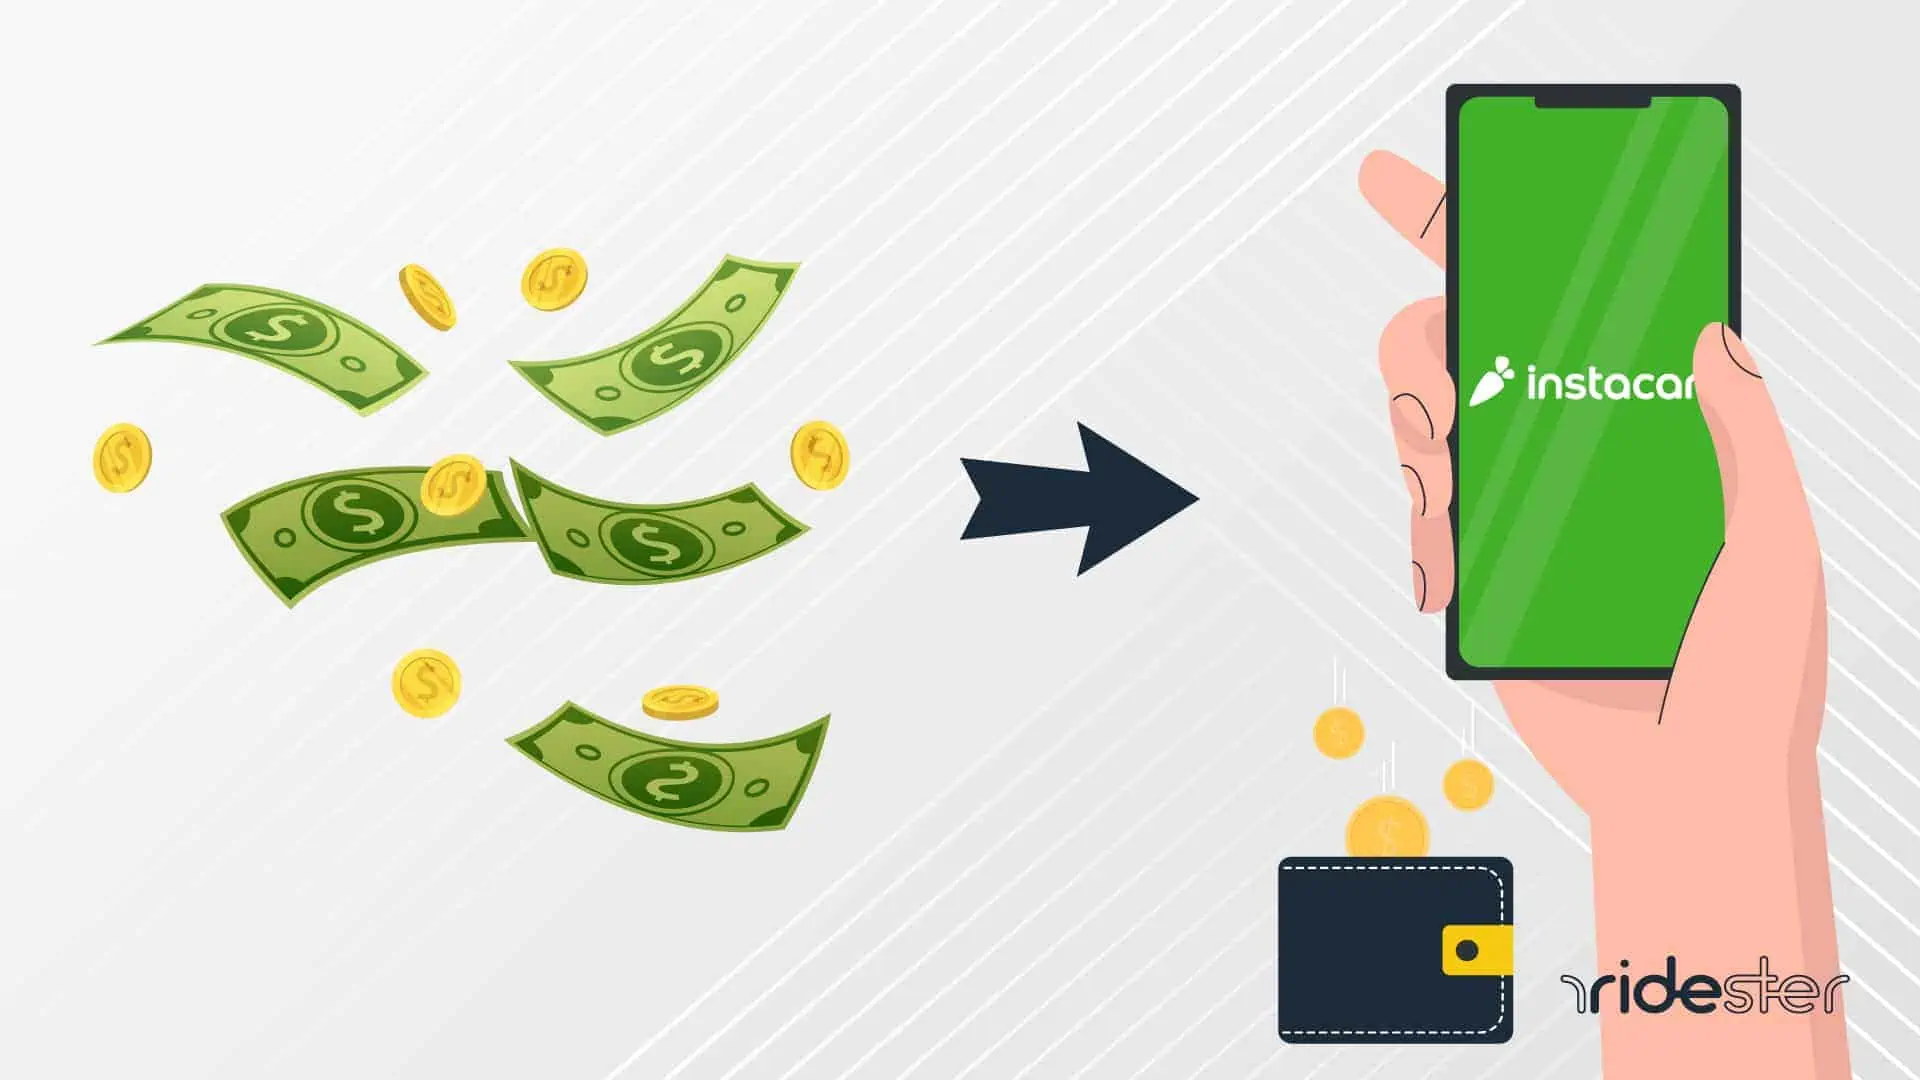 vector graphic showing money flowing into a smartphone running the instacart app on the how to save money on instacart image on ridester.com